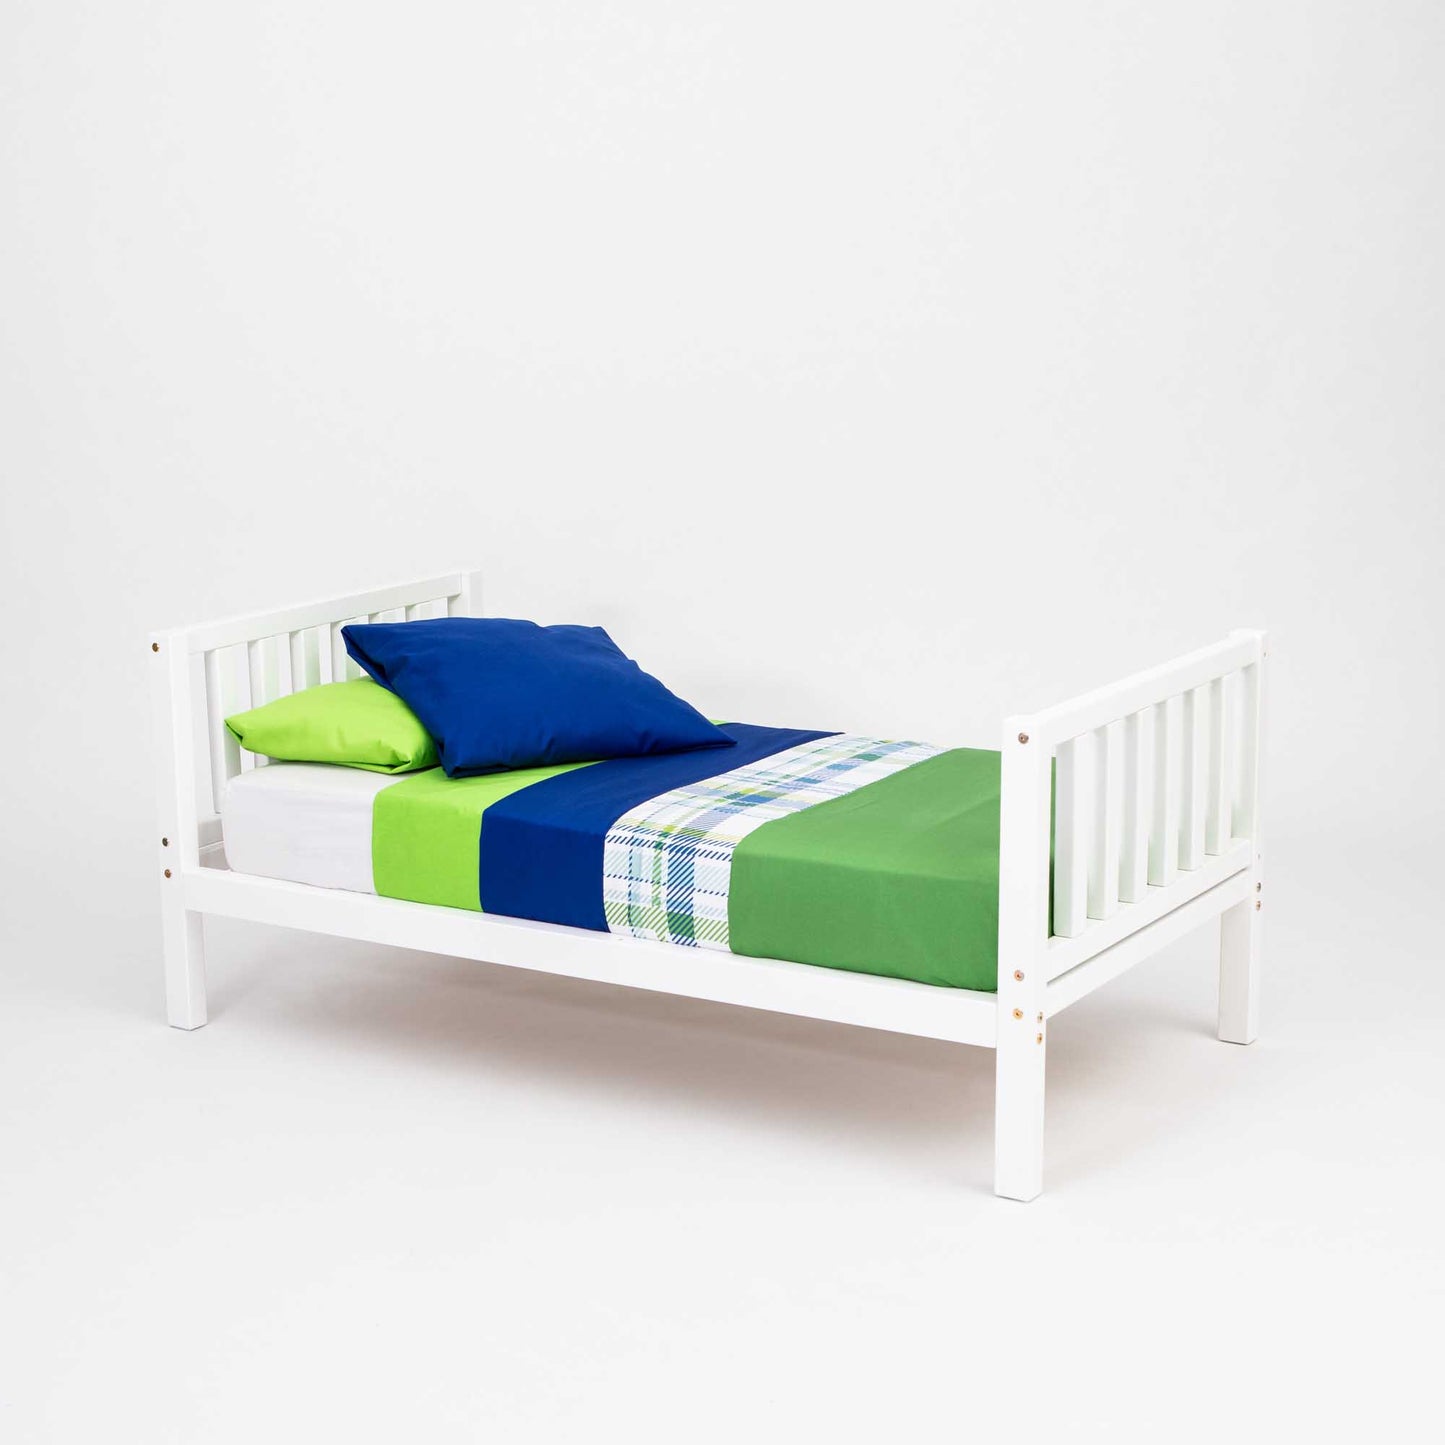 A 2-in-1 kid's bed on legs with a vertical rail headboard and footboard with green and blue bedding made of solid pine or birch wood.